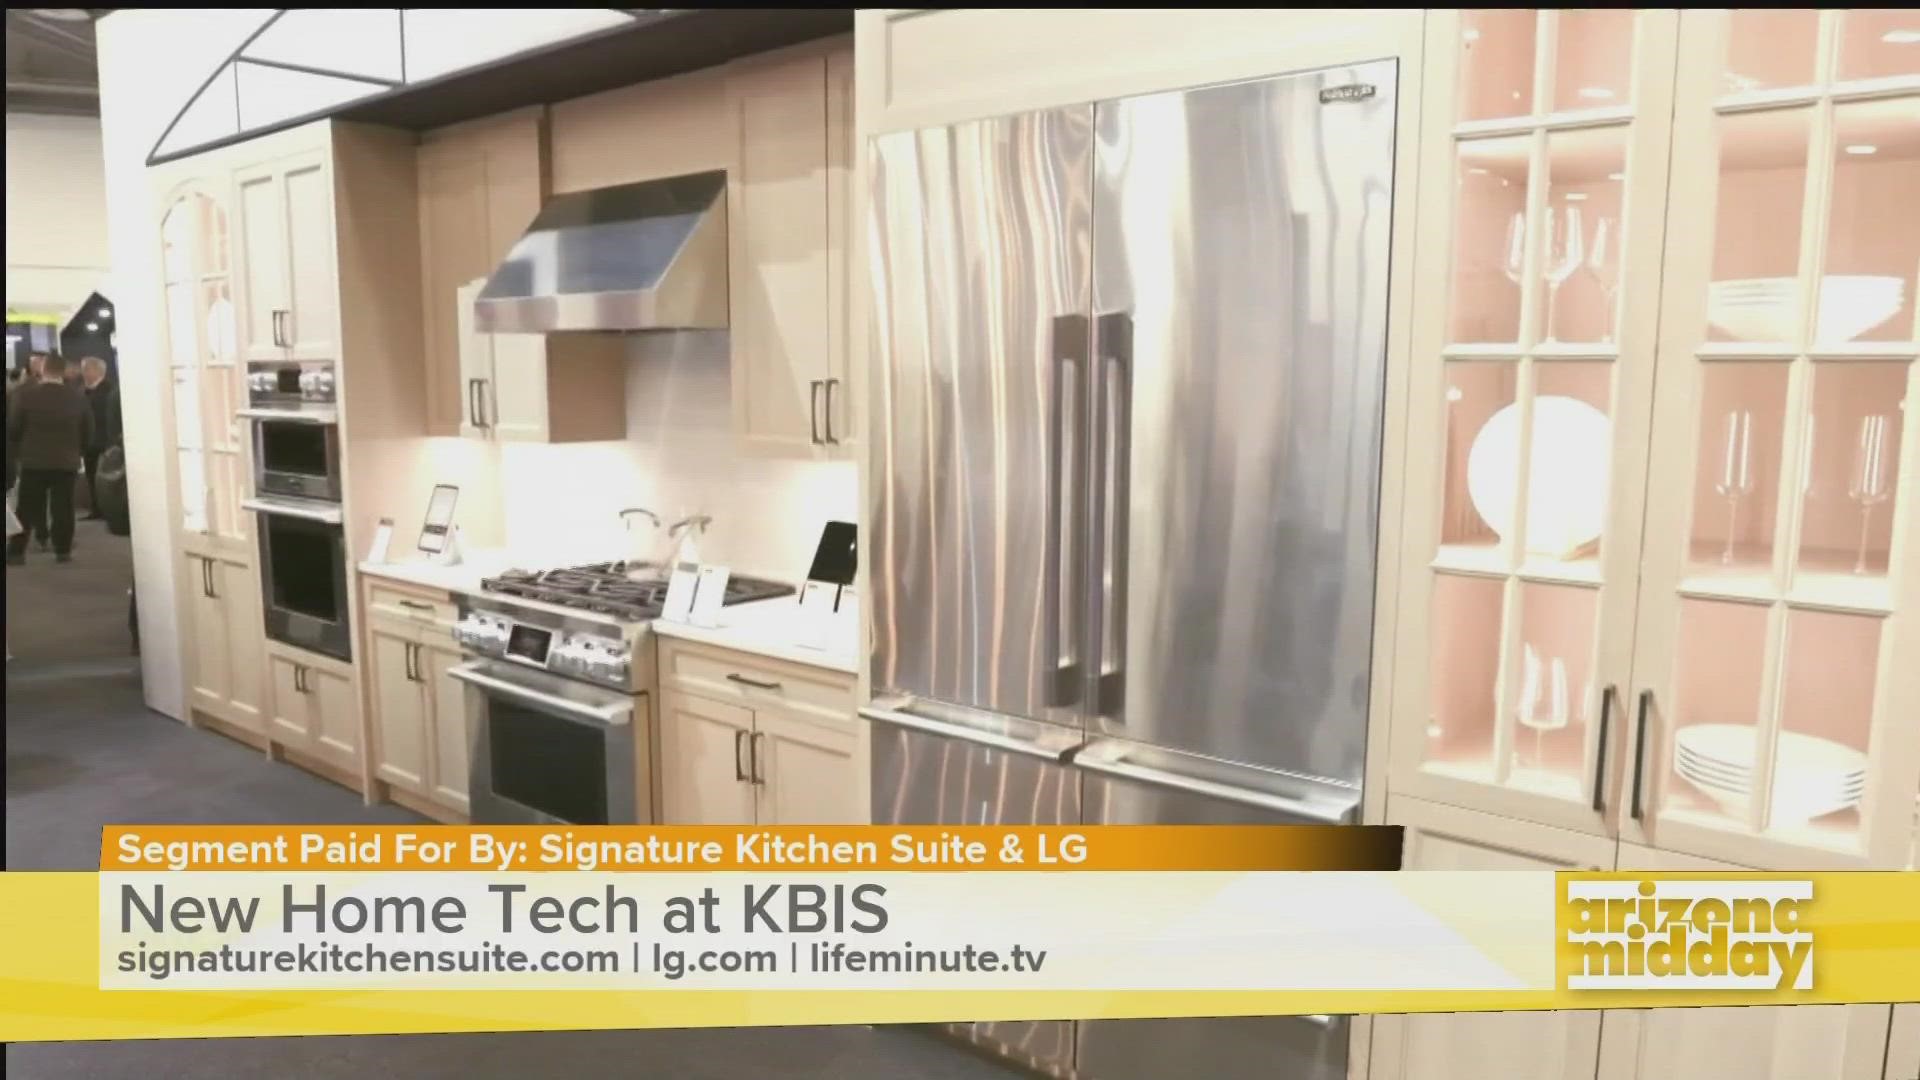 Lifestyle Editor Joann Butler with Lifeminute TV shows you the best tech products on the market to give your kitchen or laundry room a new look!